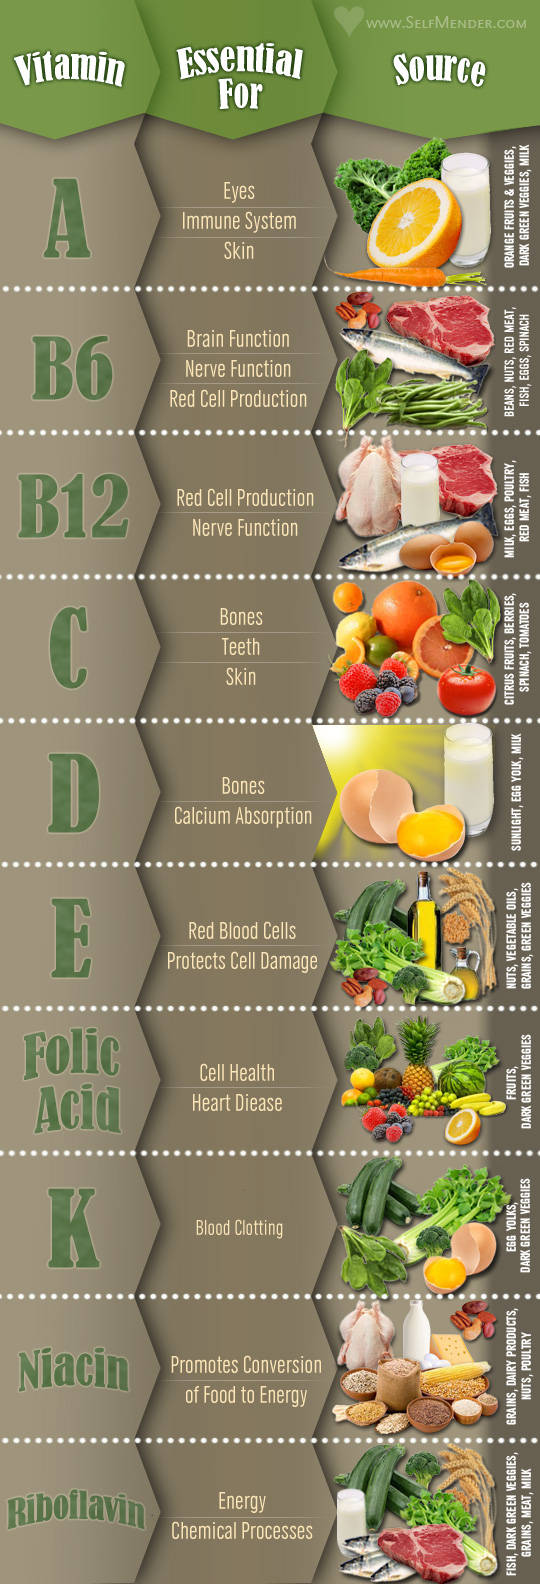 Essential guide to essential vitamins and their food sources